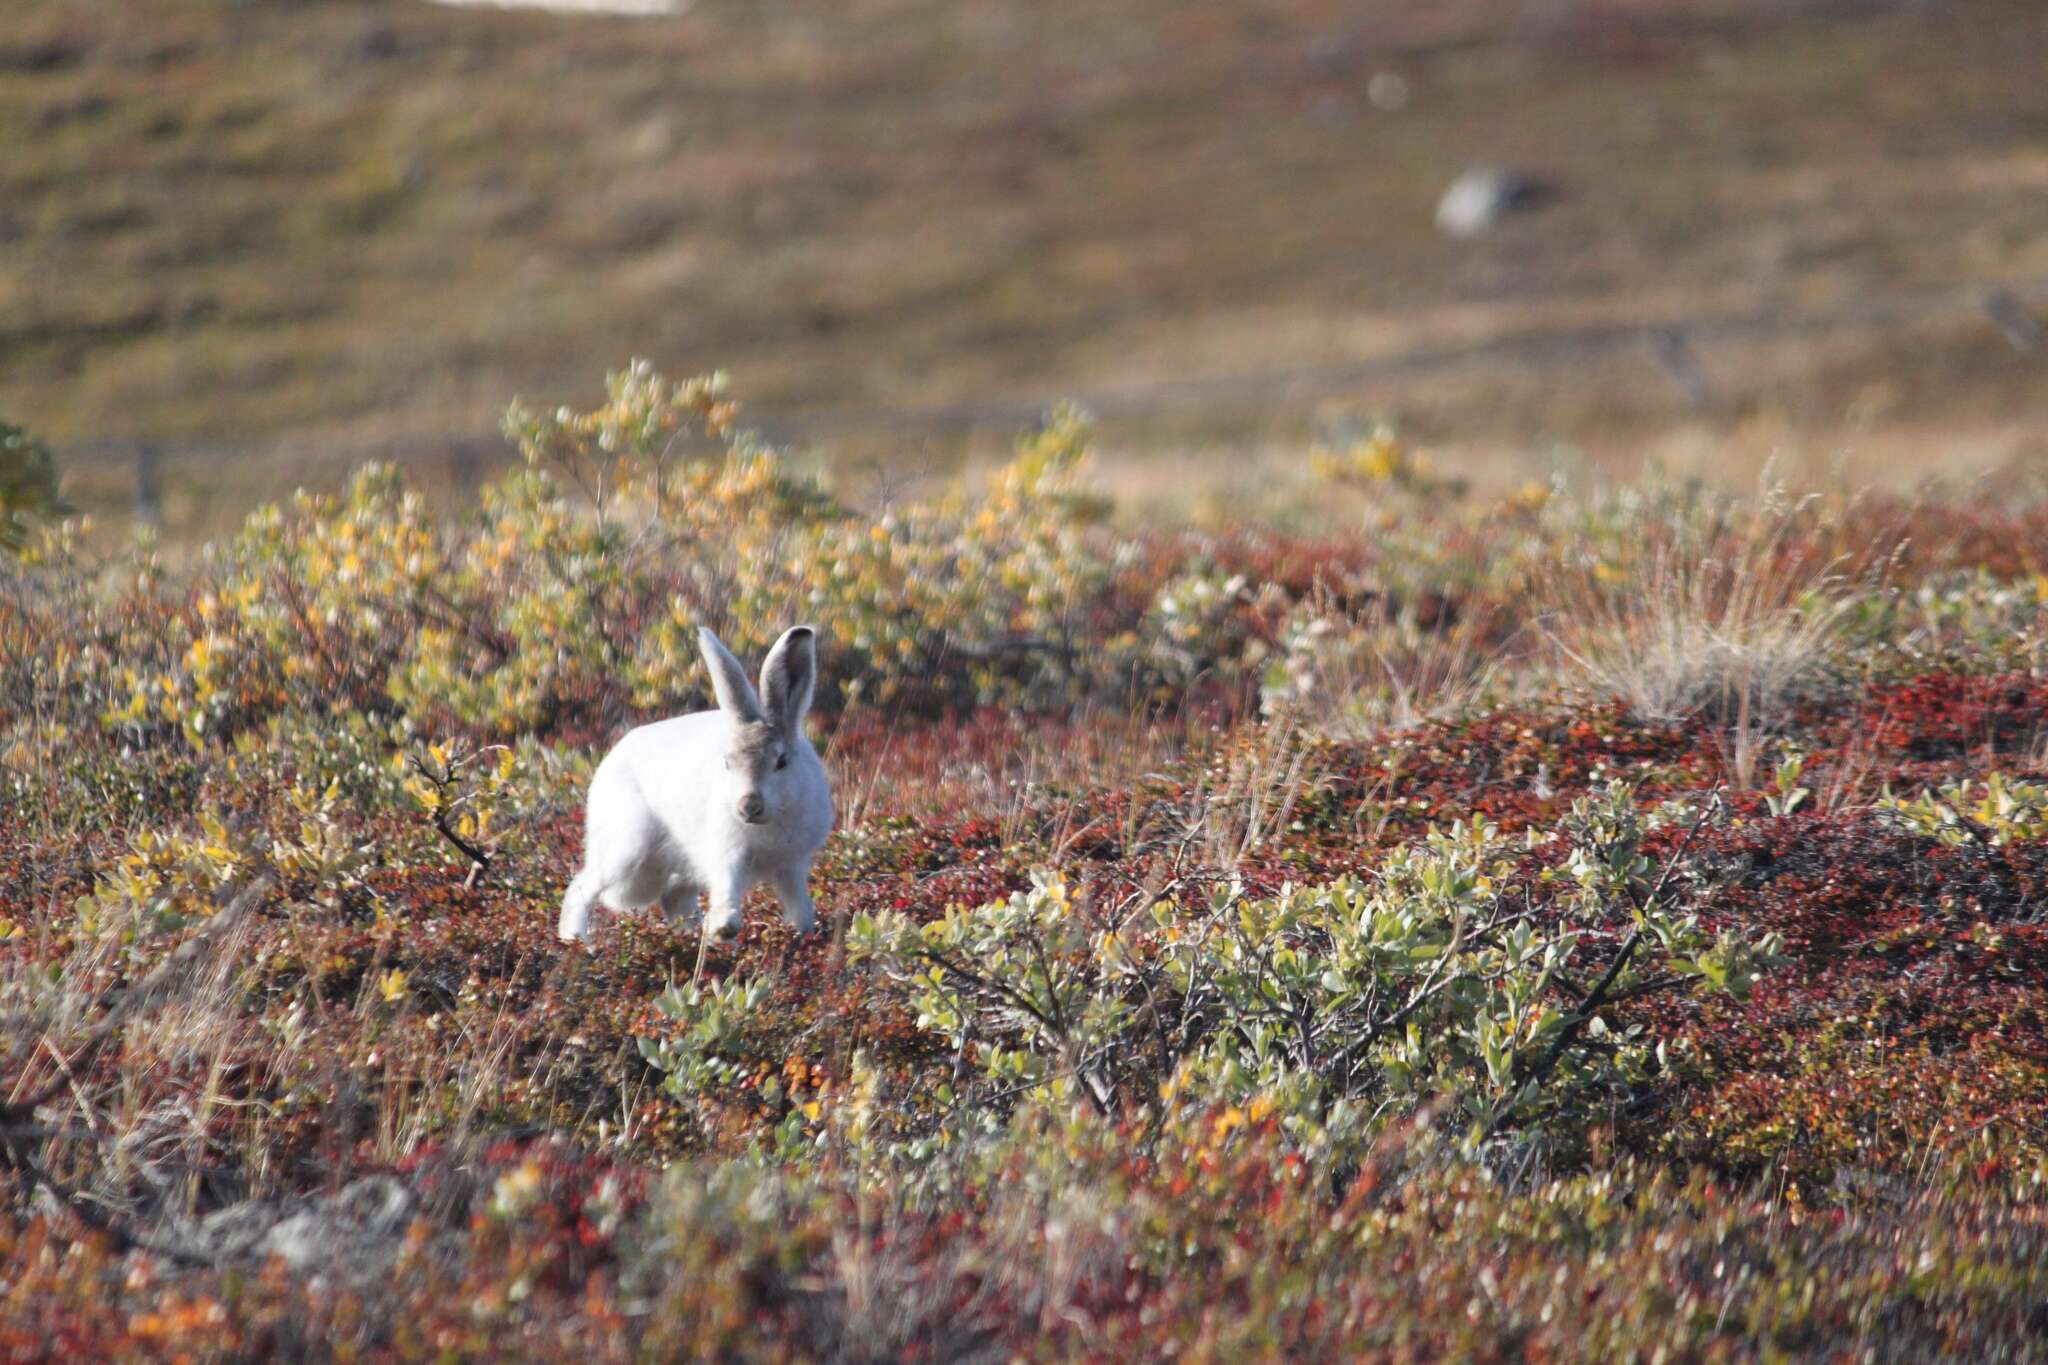 Image of Arctic Hare